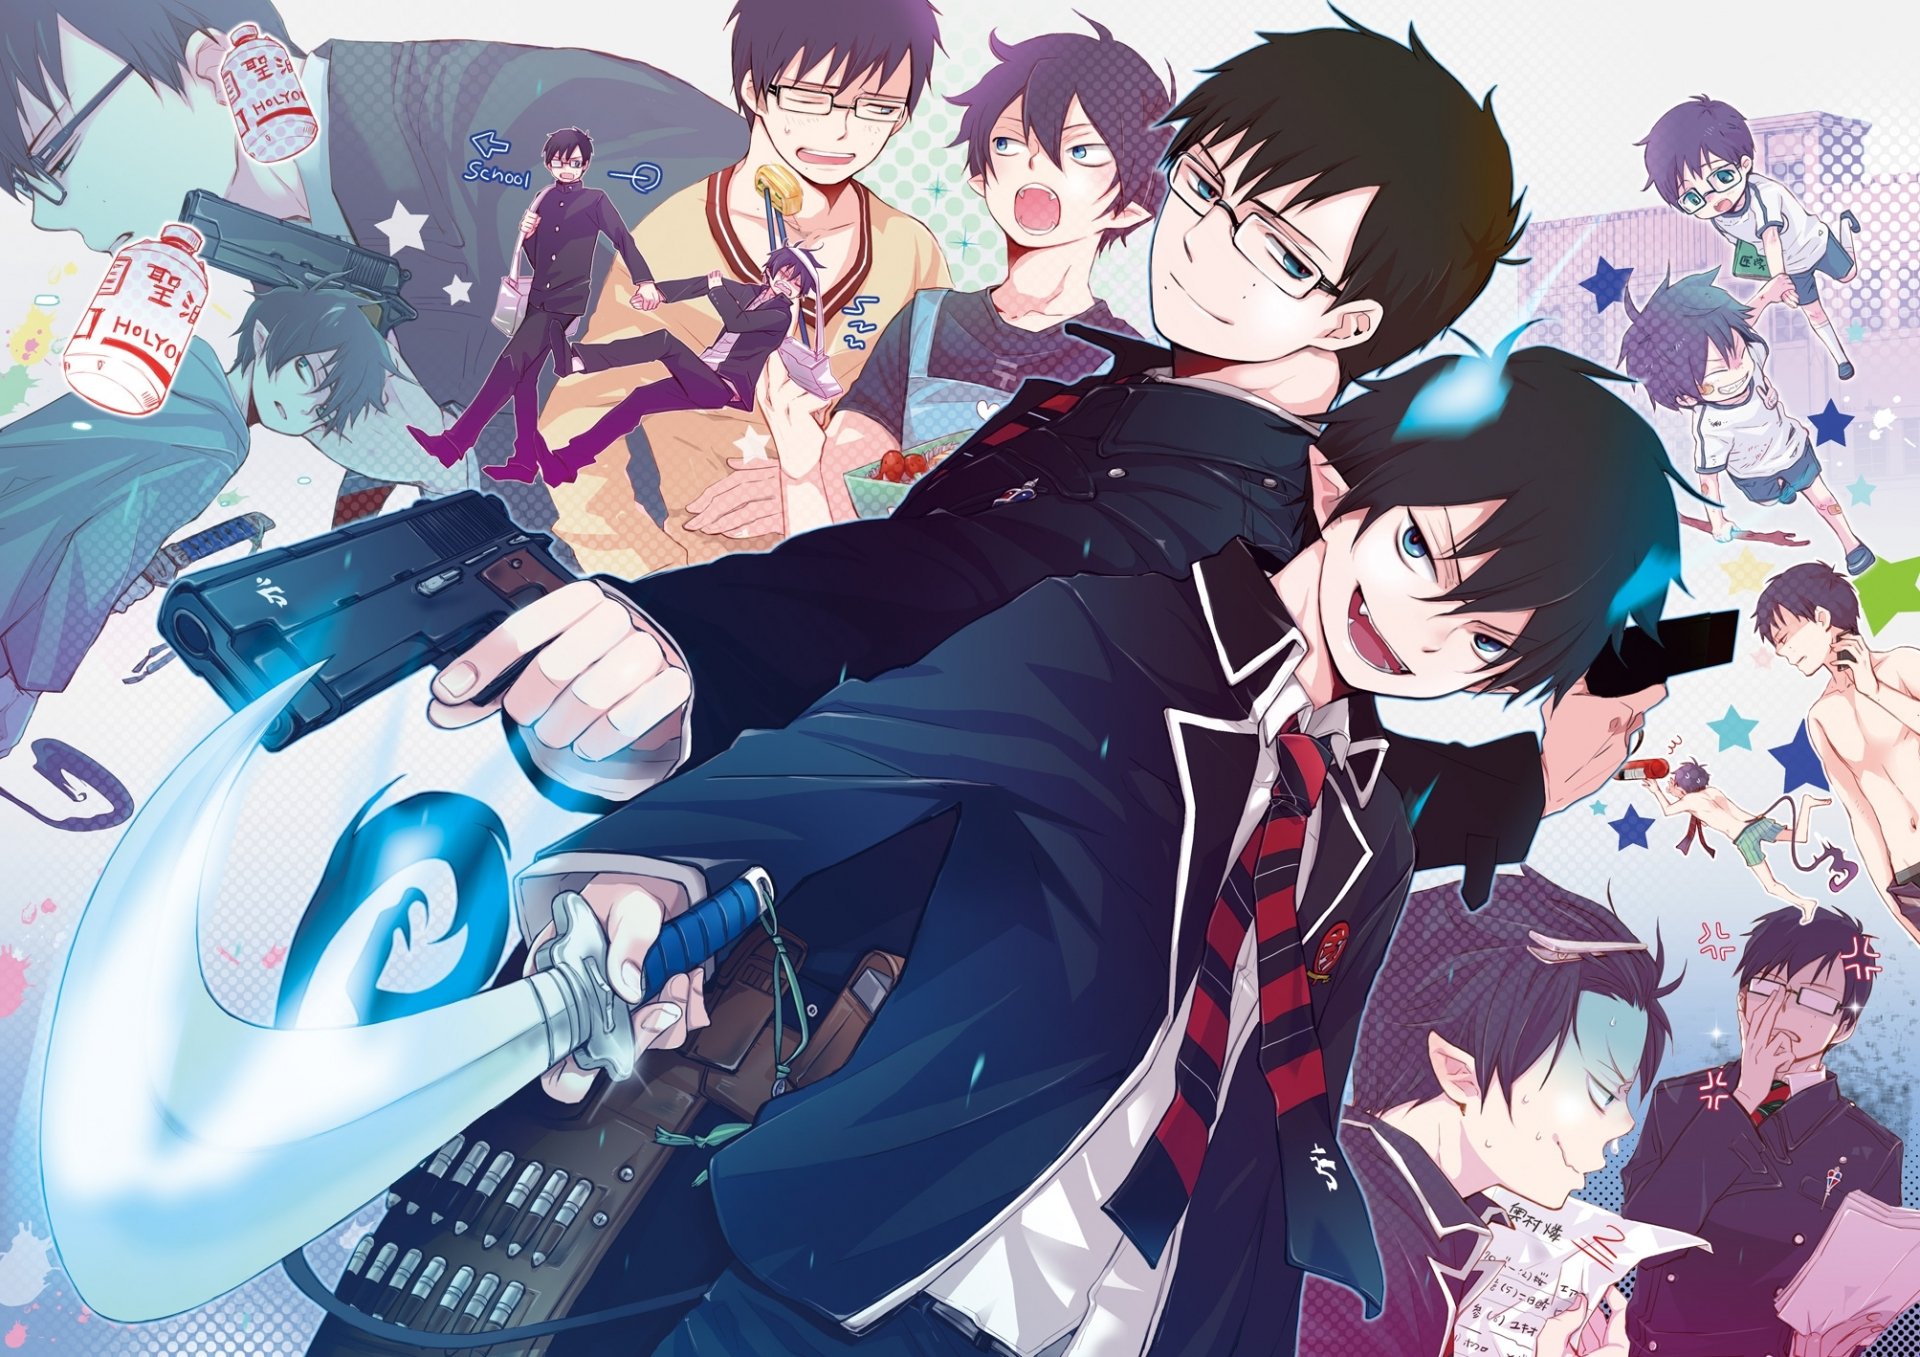 6. Blue Exorcist - wide 4